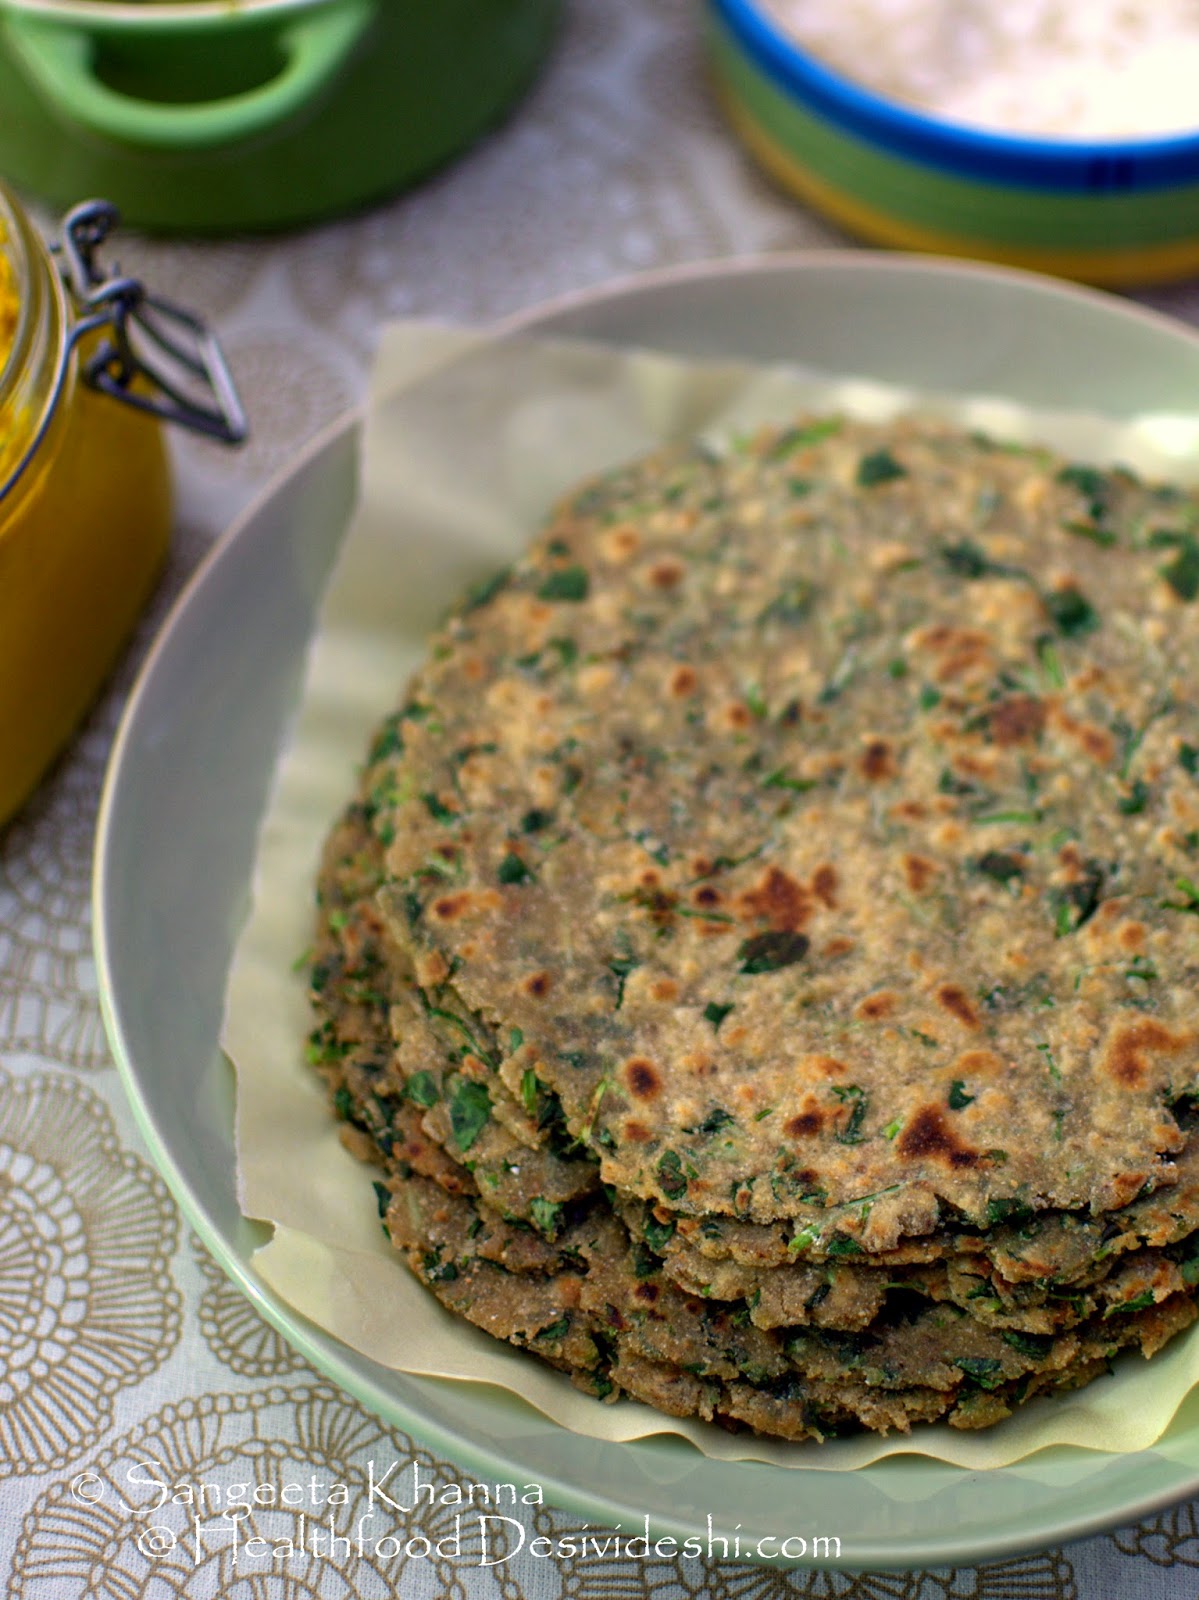 101 alternative flours : jowar methi paratha | flat bread made with sorghum flour and fenugreek leaves | how to cook millet flours